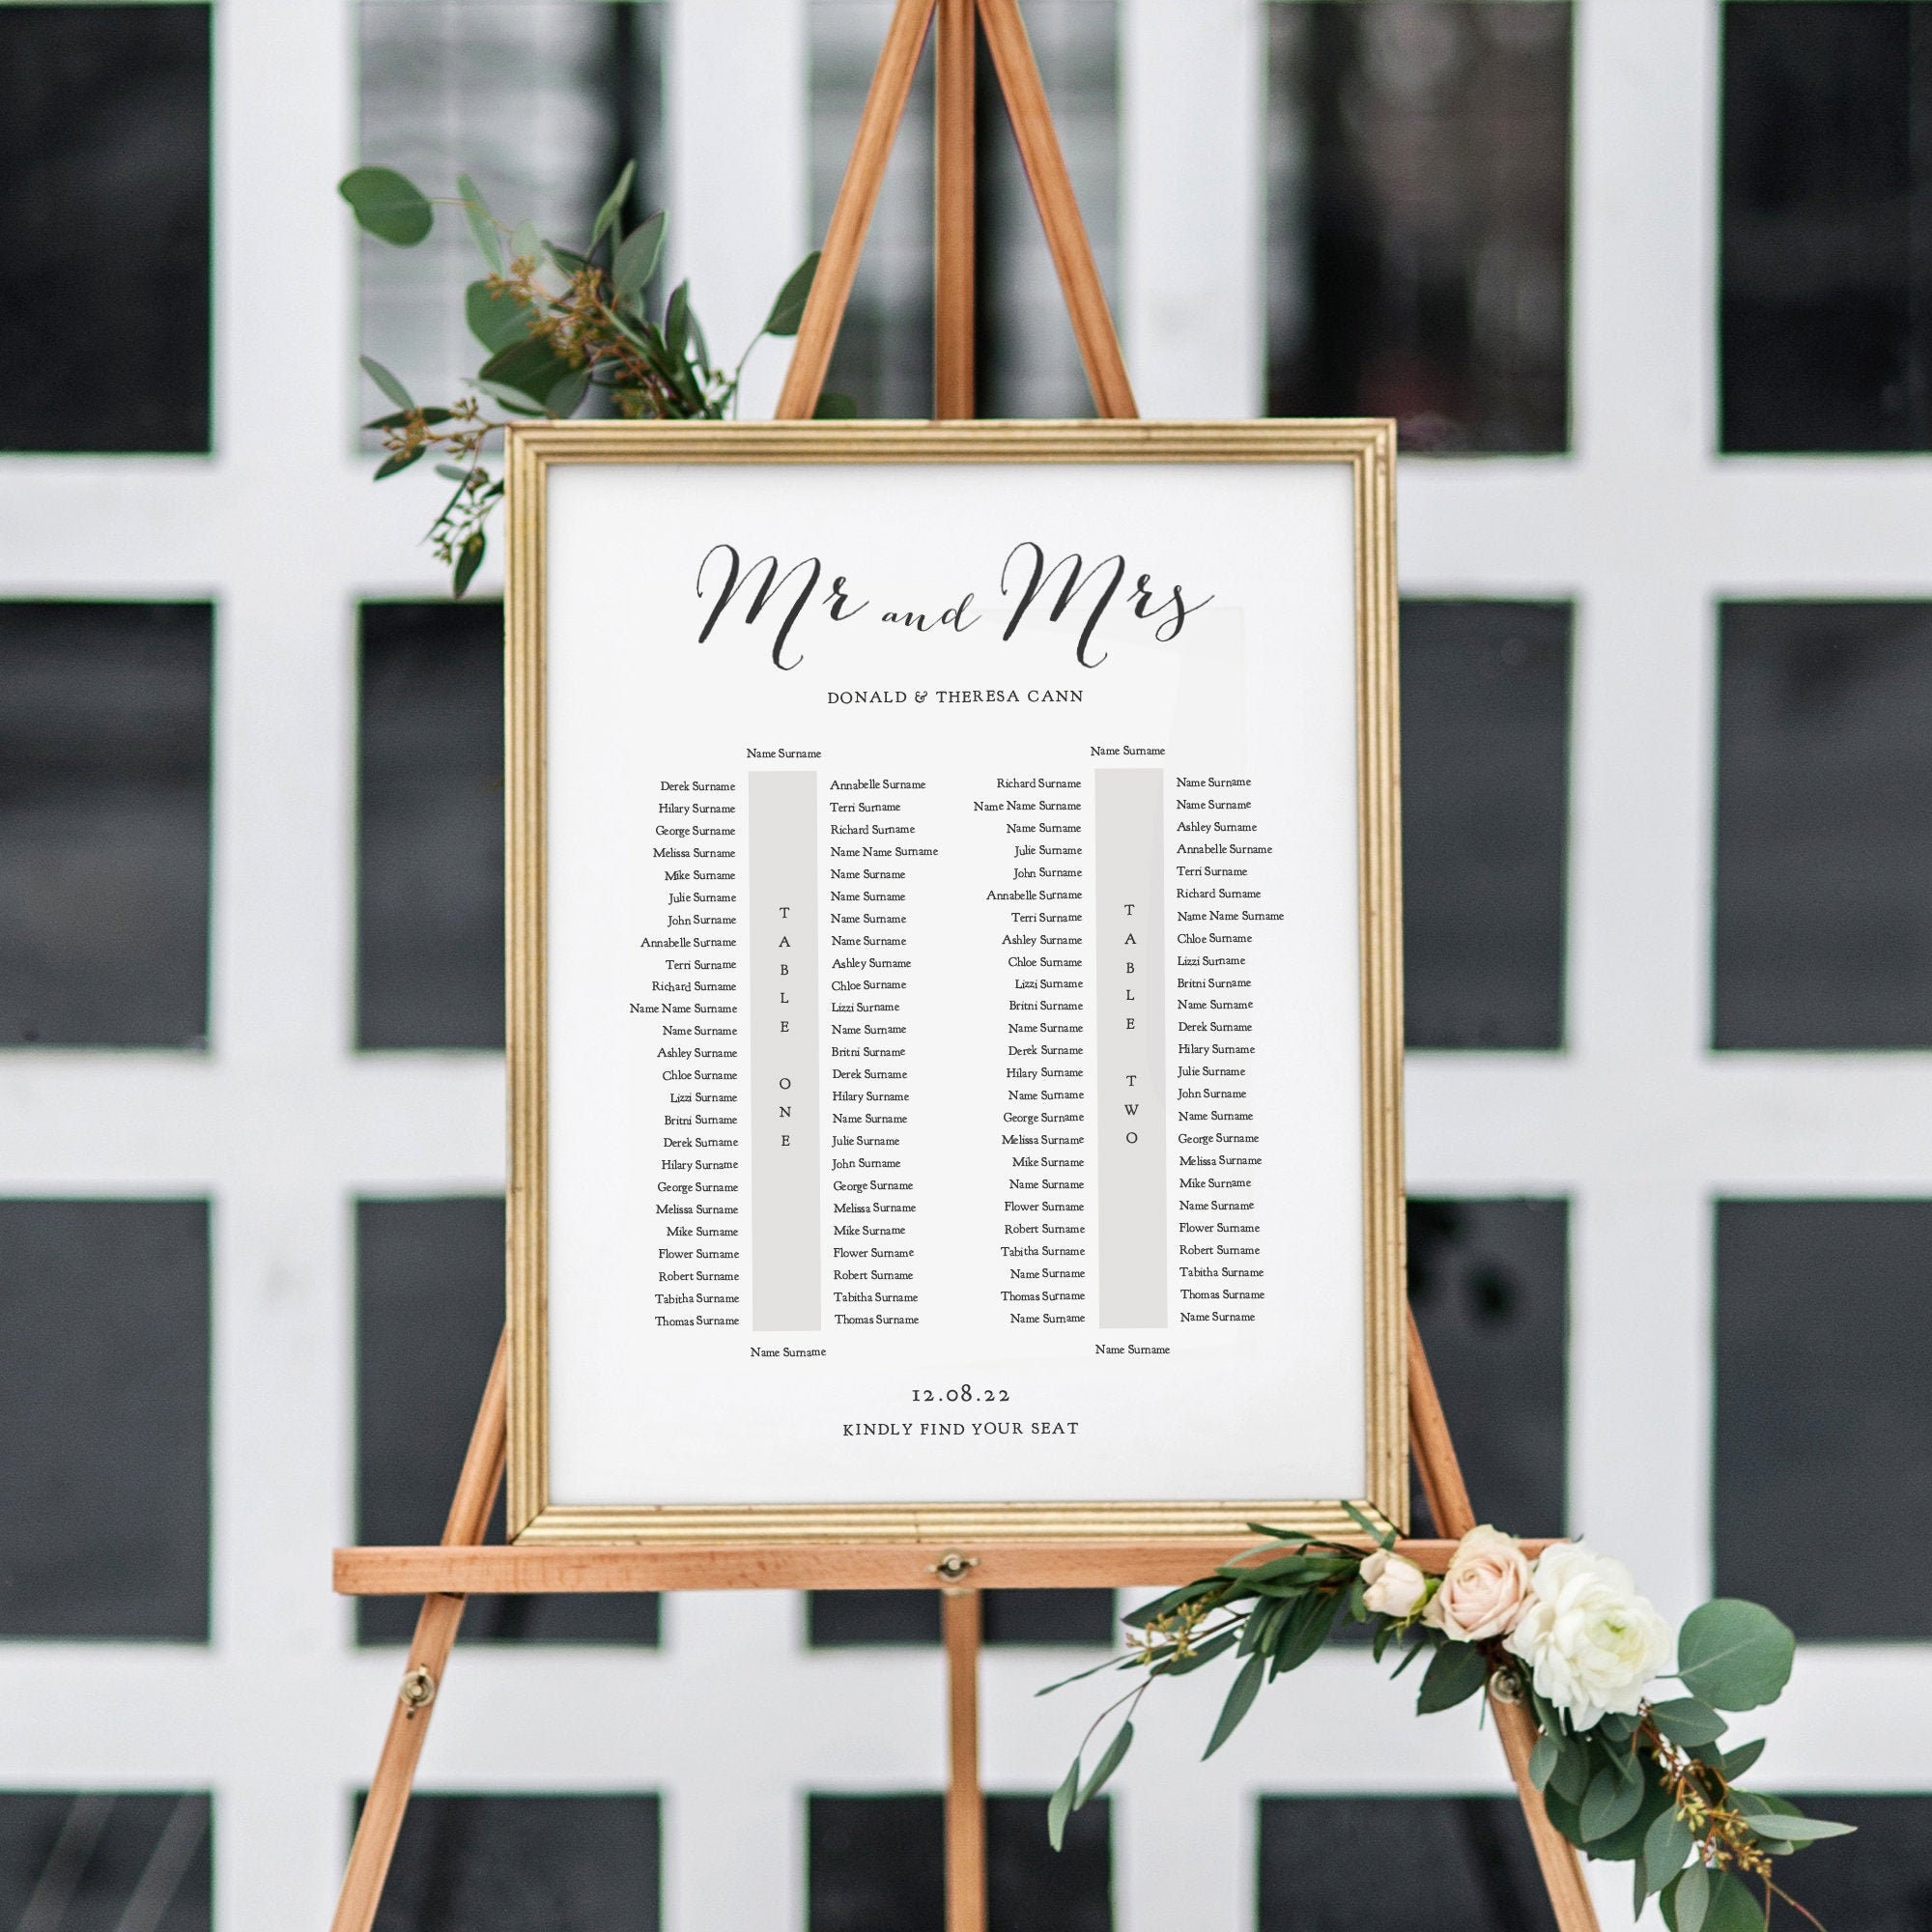 banquet-seating-chart-2-long-tables-banquet-table-plan-printable